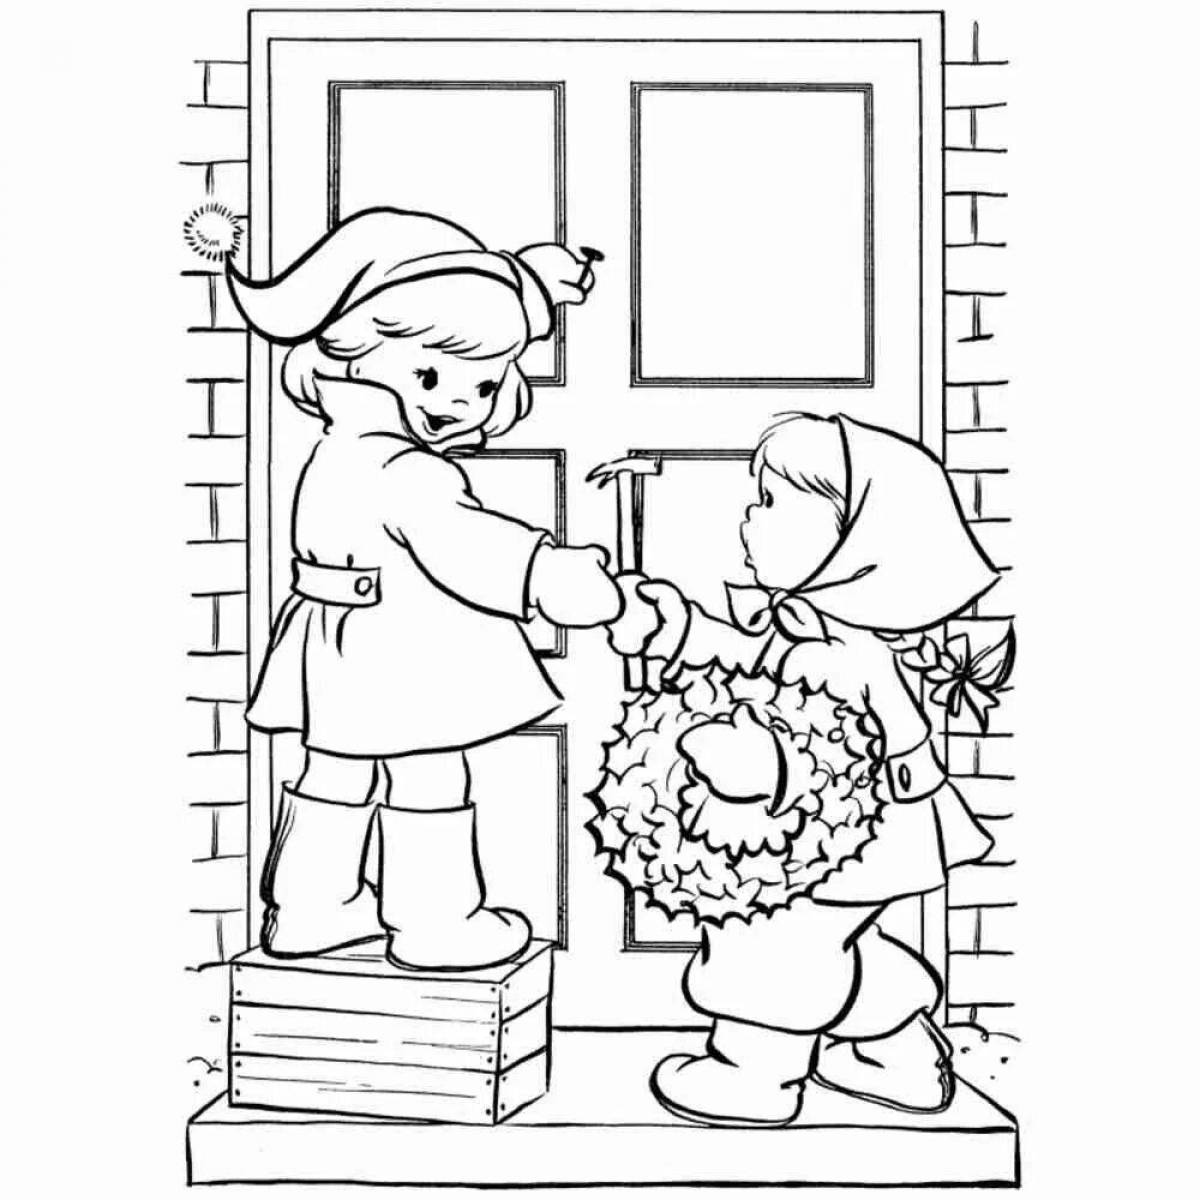 Carol coloring pages with crazy coloring for kids 6-7 years old